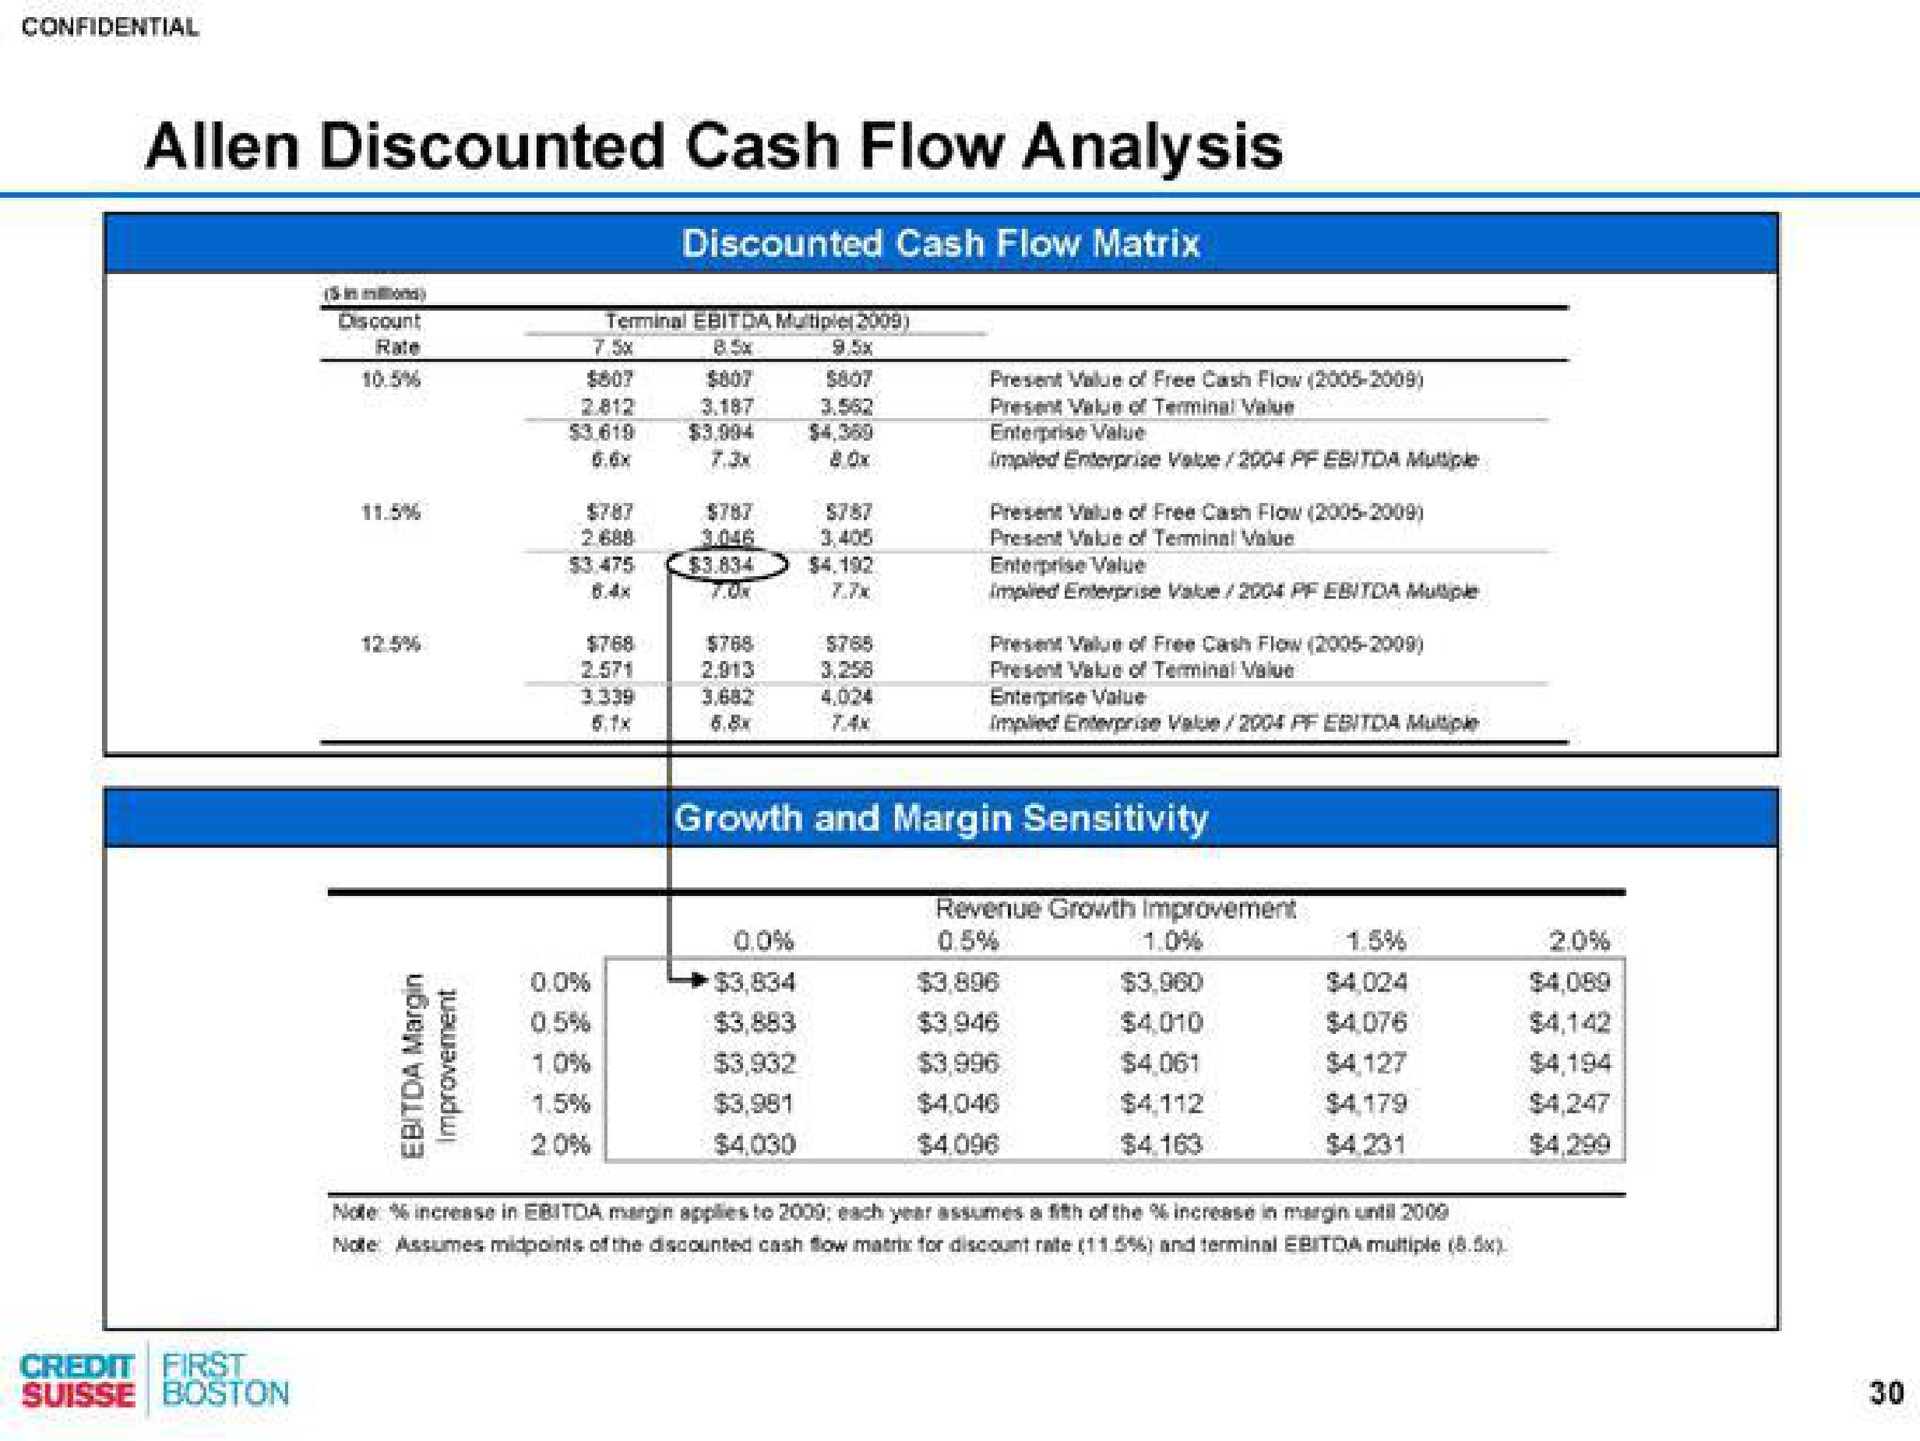 discounted cash flow analysis | Credit Suisse